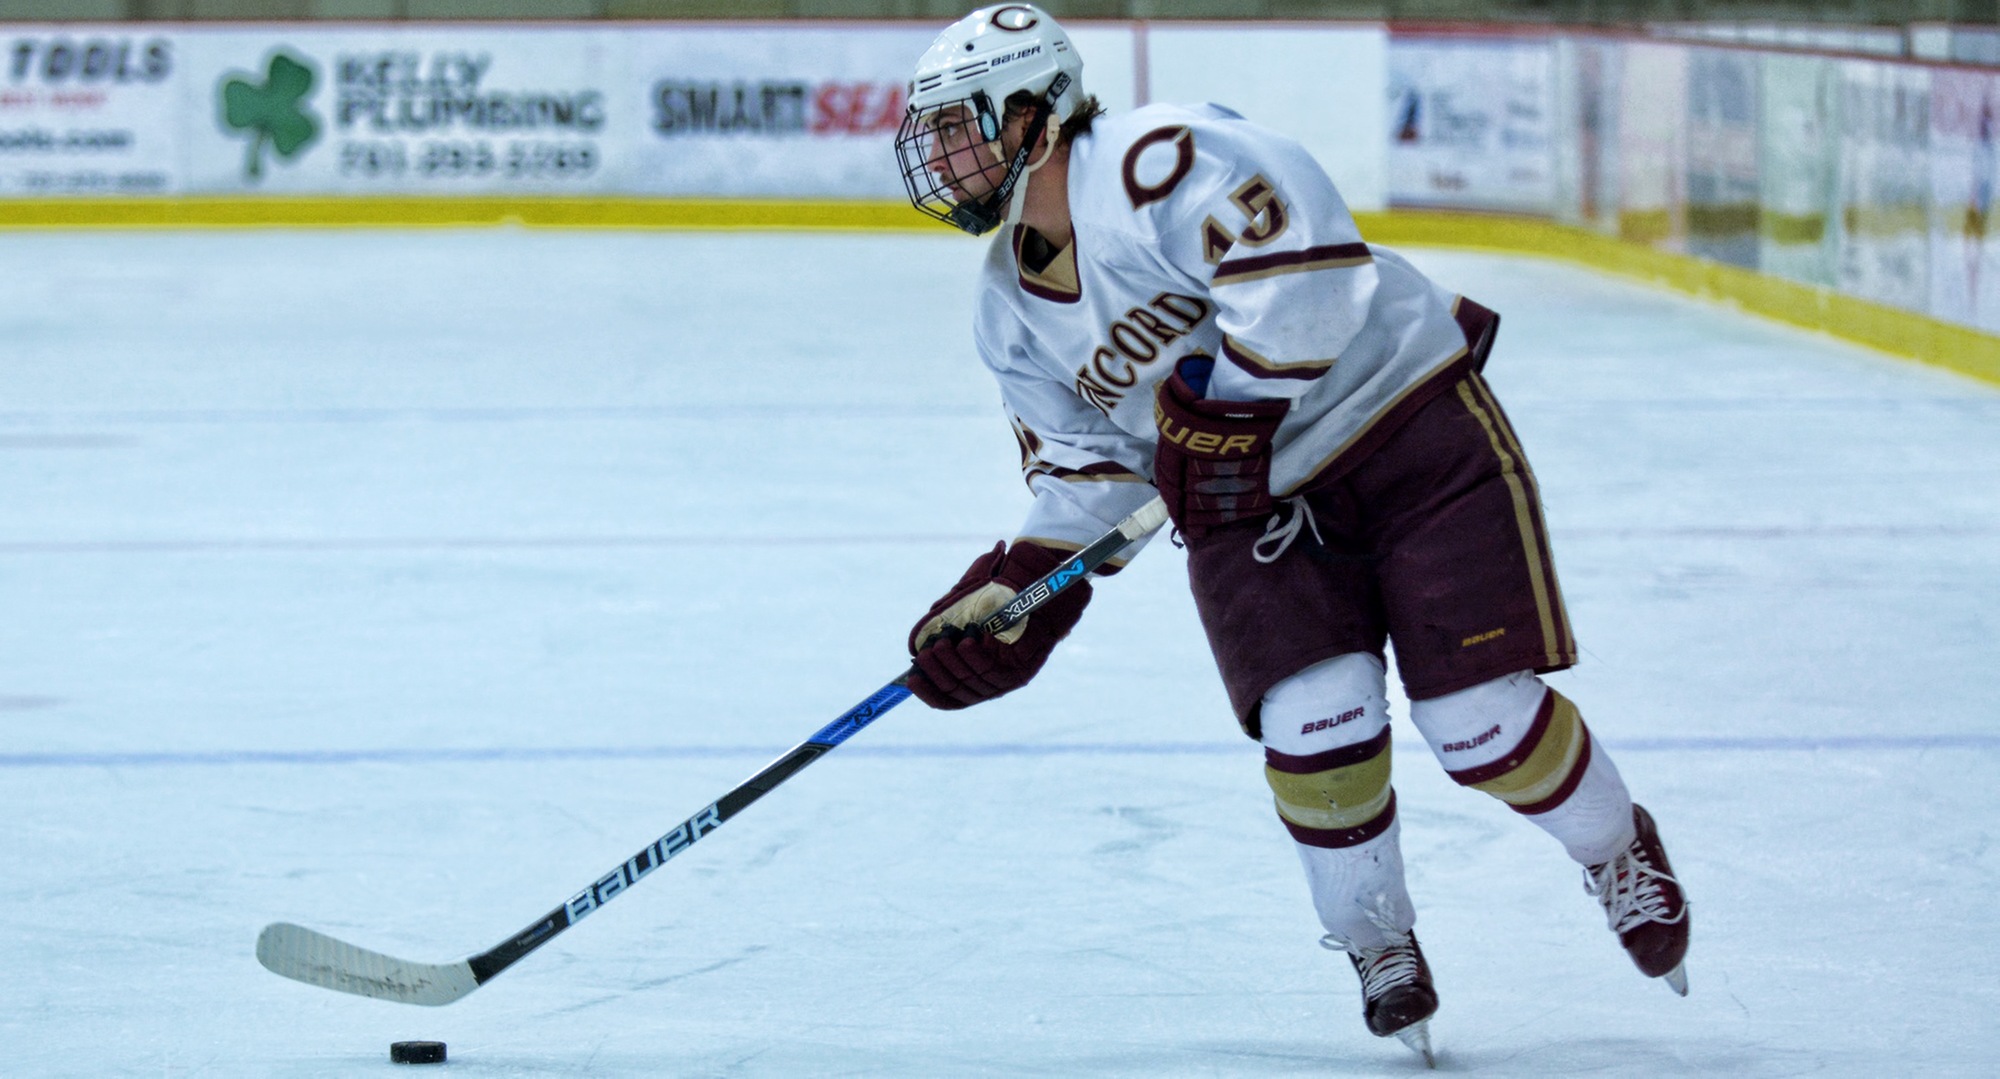 Senior Mario Bianchi scored five goals in the Cobbers' two wins at the MIAC Showcase.